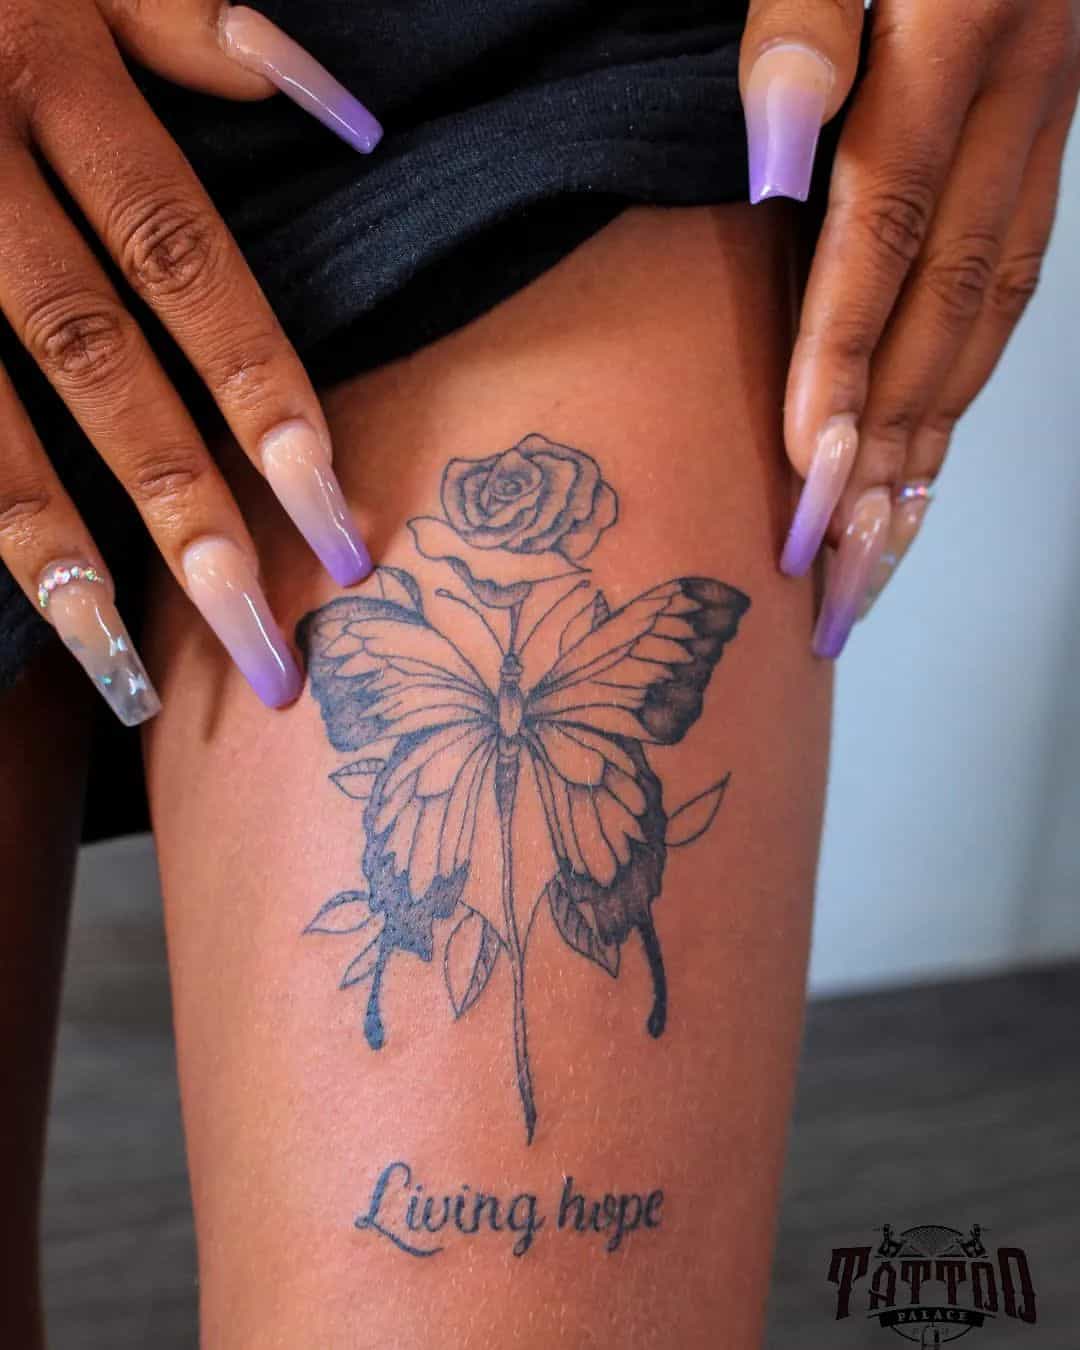 
Butterfly and roses tattoo thigh on black skin